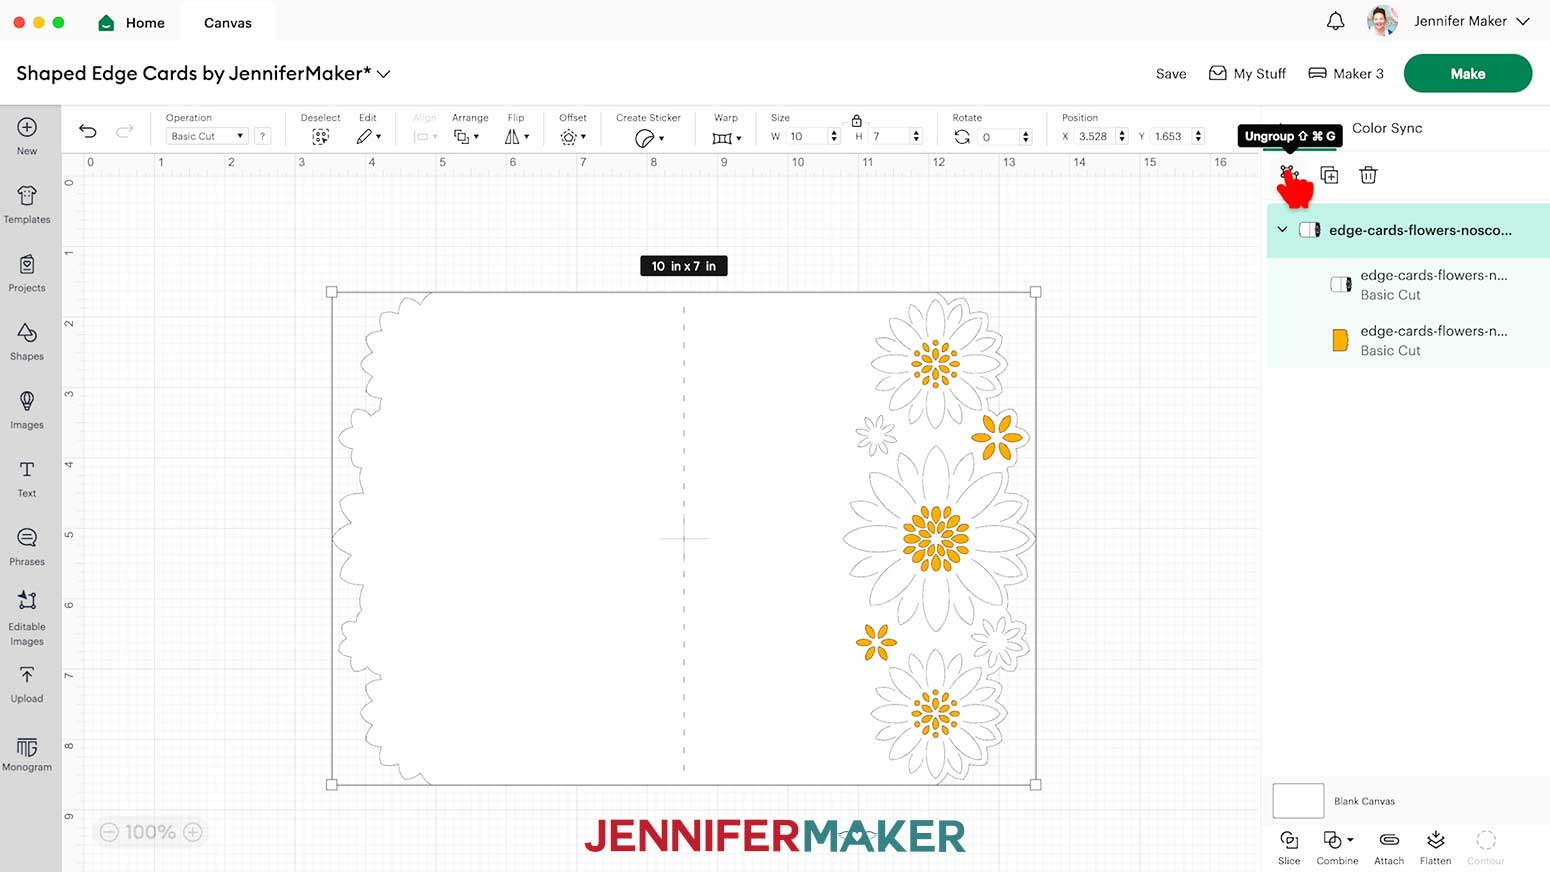 In Cricut Design Space, click the Ungroup button to ungroup the flower shaped edge card design layers